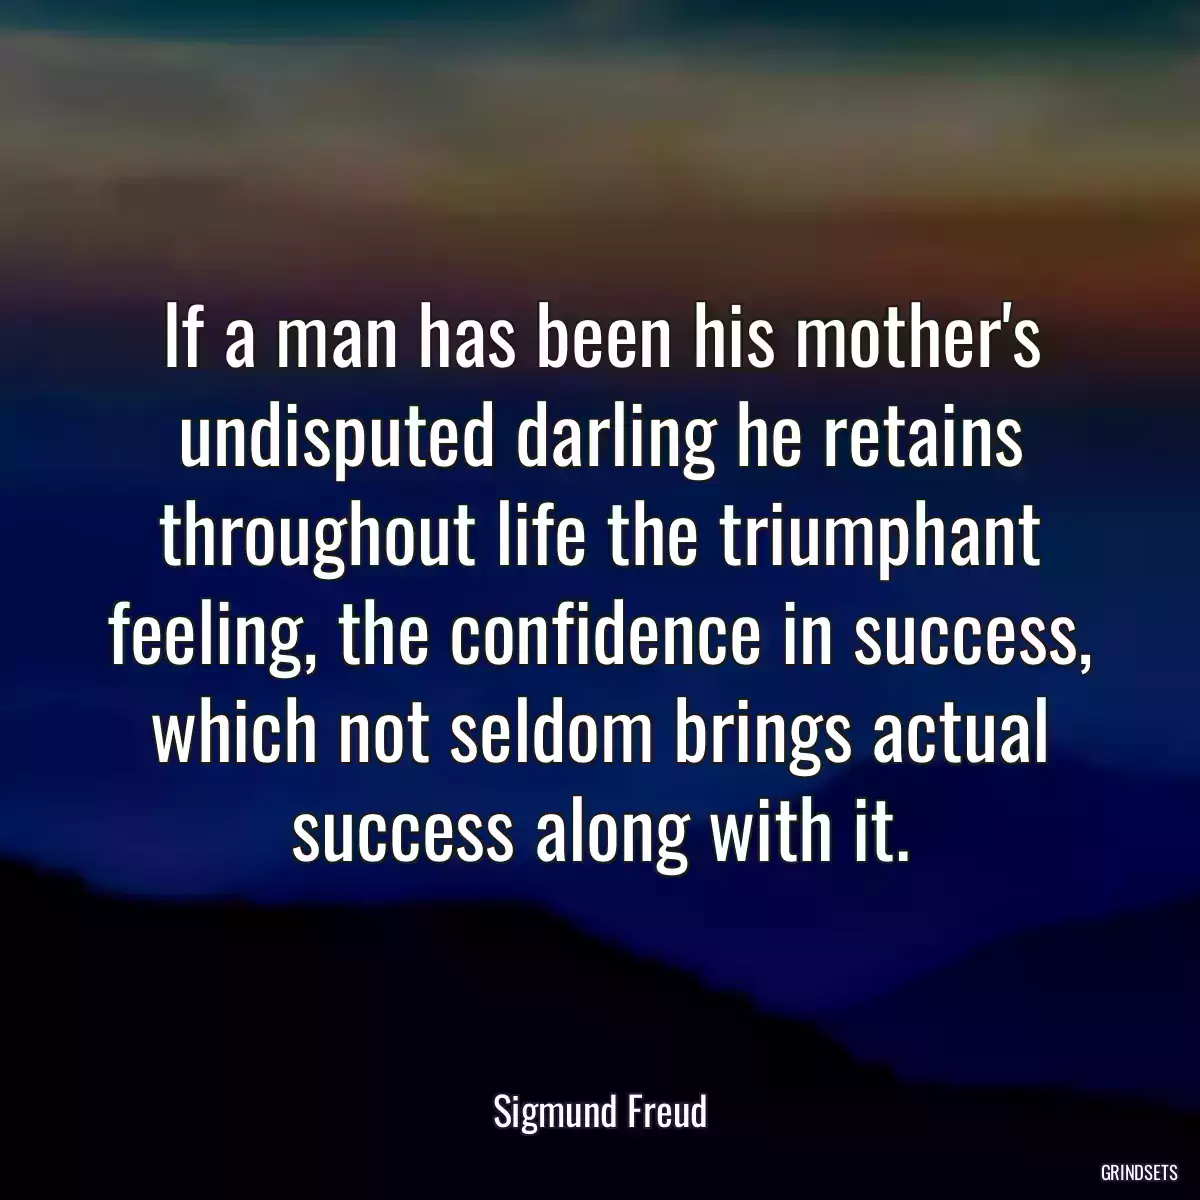 If a man has been his mother\'s undisputed darling he retains throughout life the triumphant feeling, the confidence in success, which not seldom brings actual success along with it.